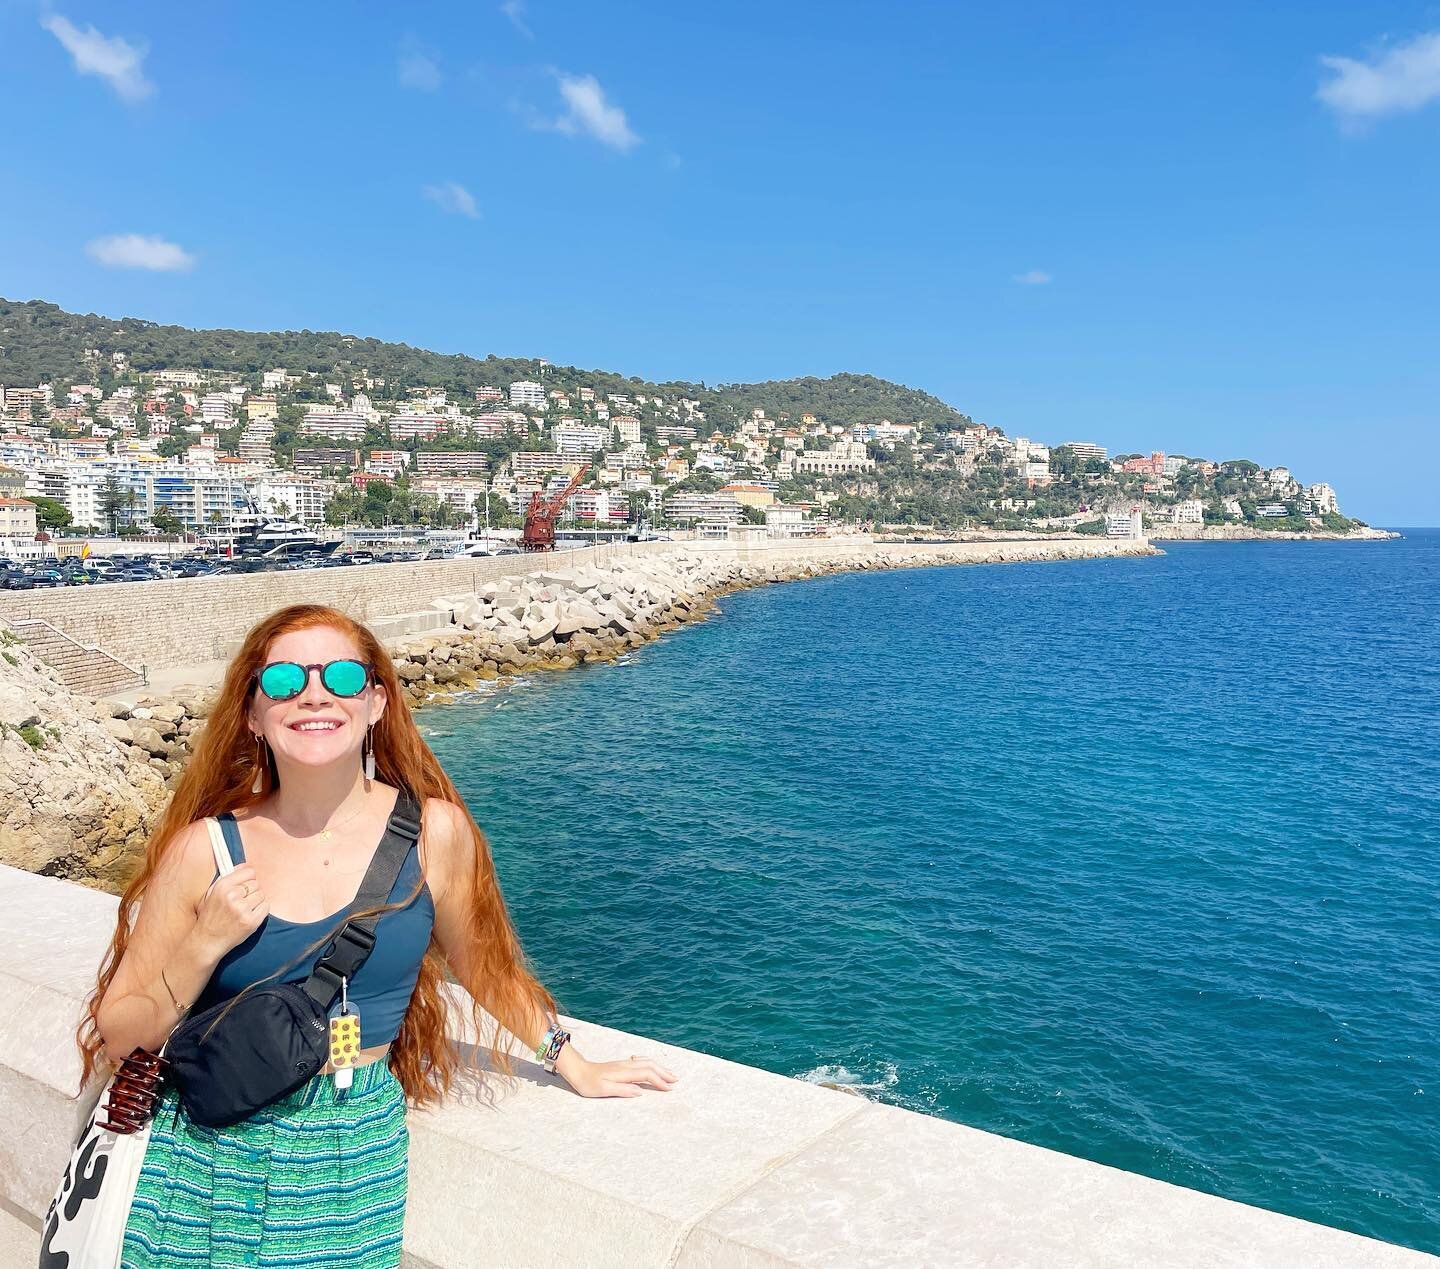 The south of France was two things for sure: 1) soooo hot 🥵 2) soooo beautiful 🤩 
&bull;
&bull;
While Nice and the C&ocirc;te d&rsquo;Azur were seriously so gorgeous, what I enjoyed most of all were the little everyday moments of normal where Kasey